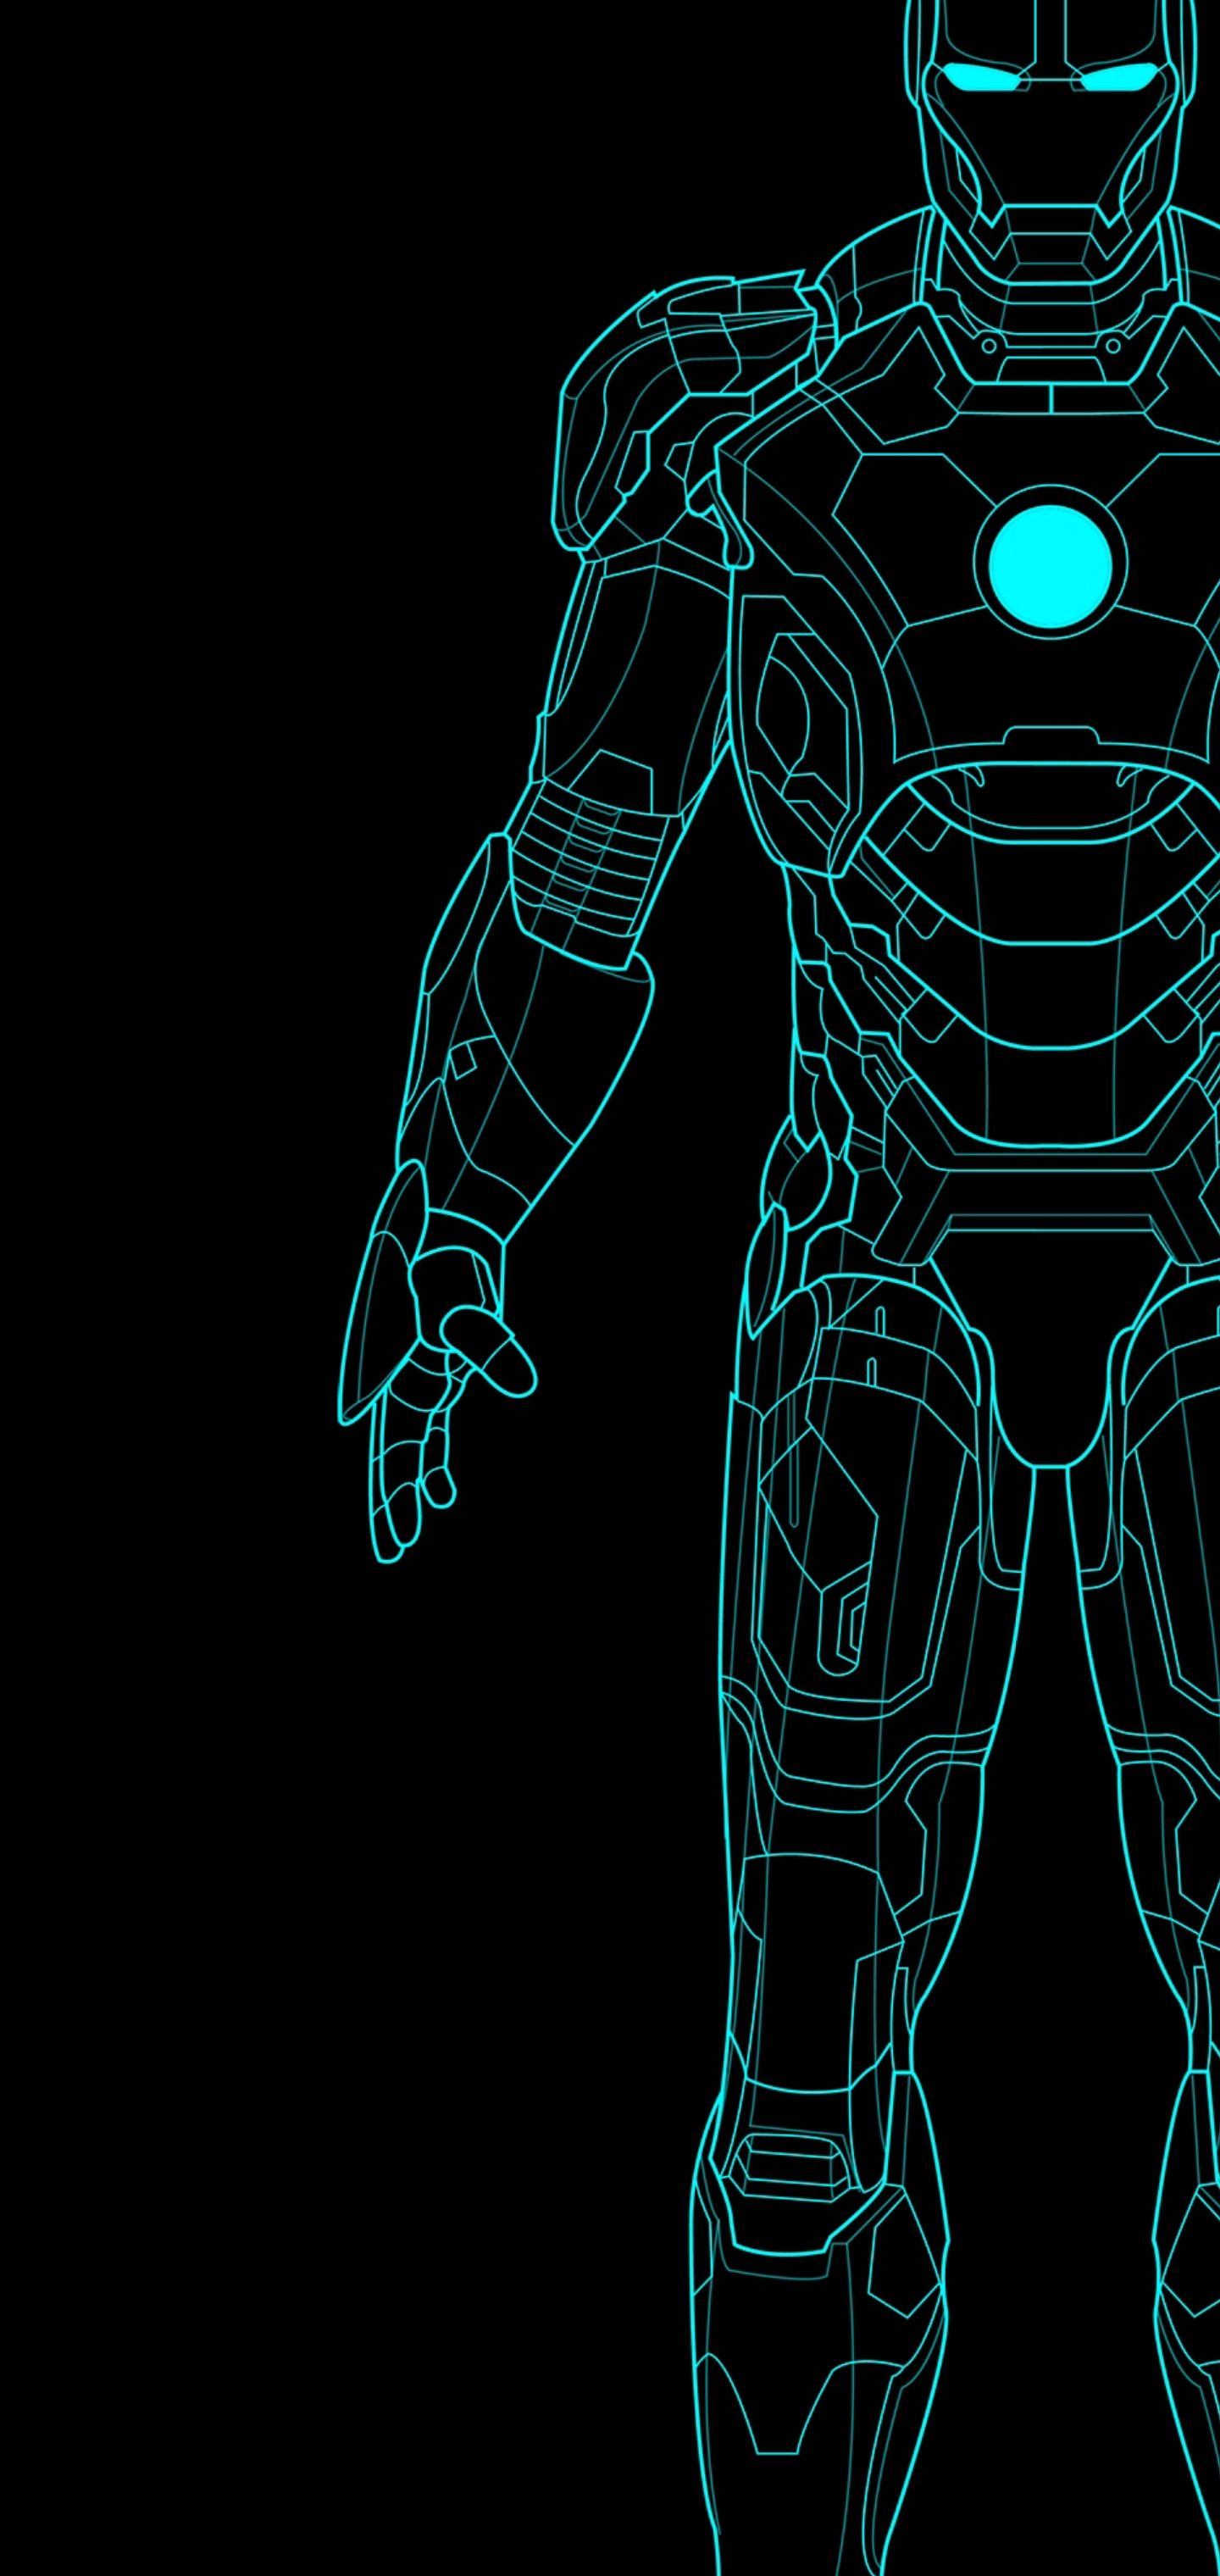 Neon Iron Man Outline Galaxy S10 Hole Punch Wallpaper